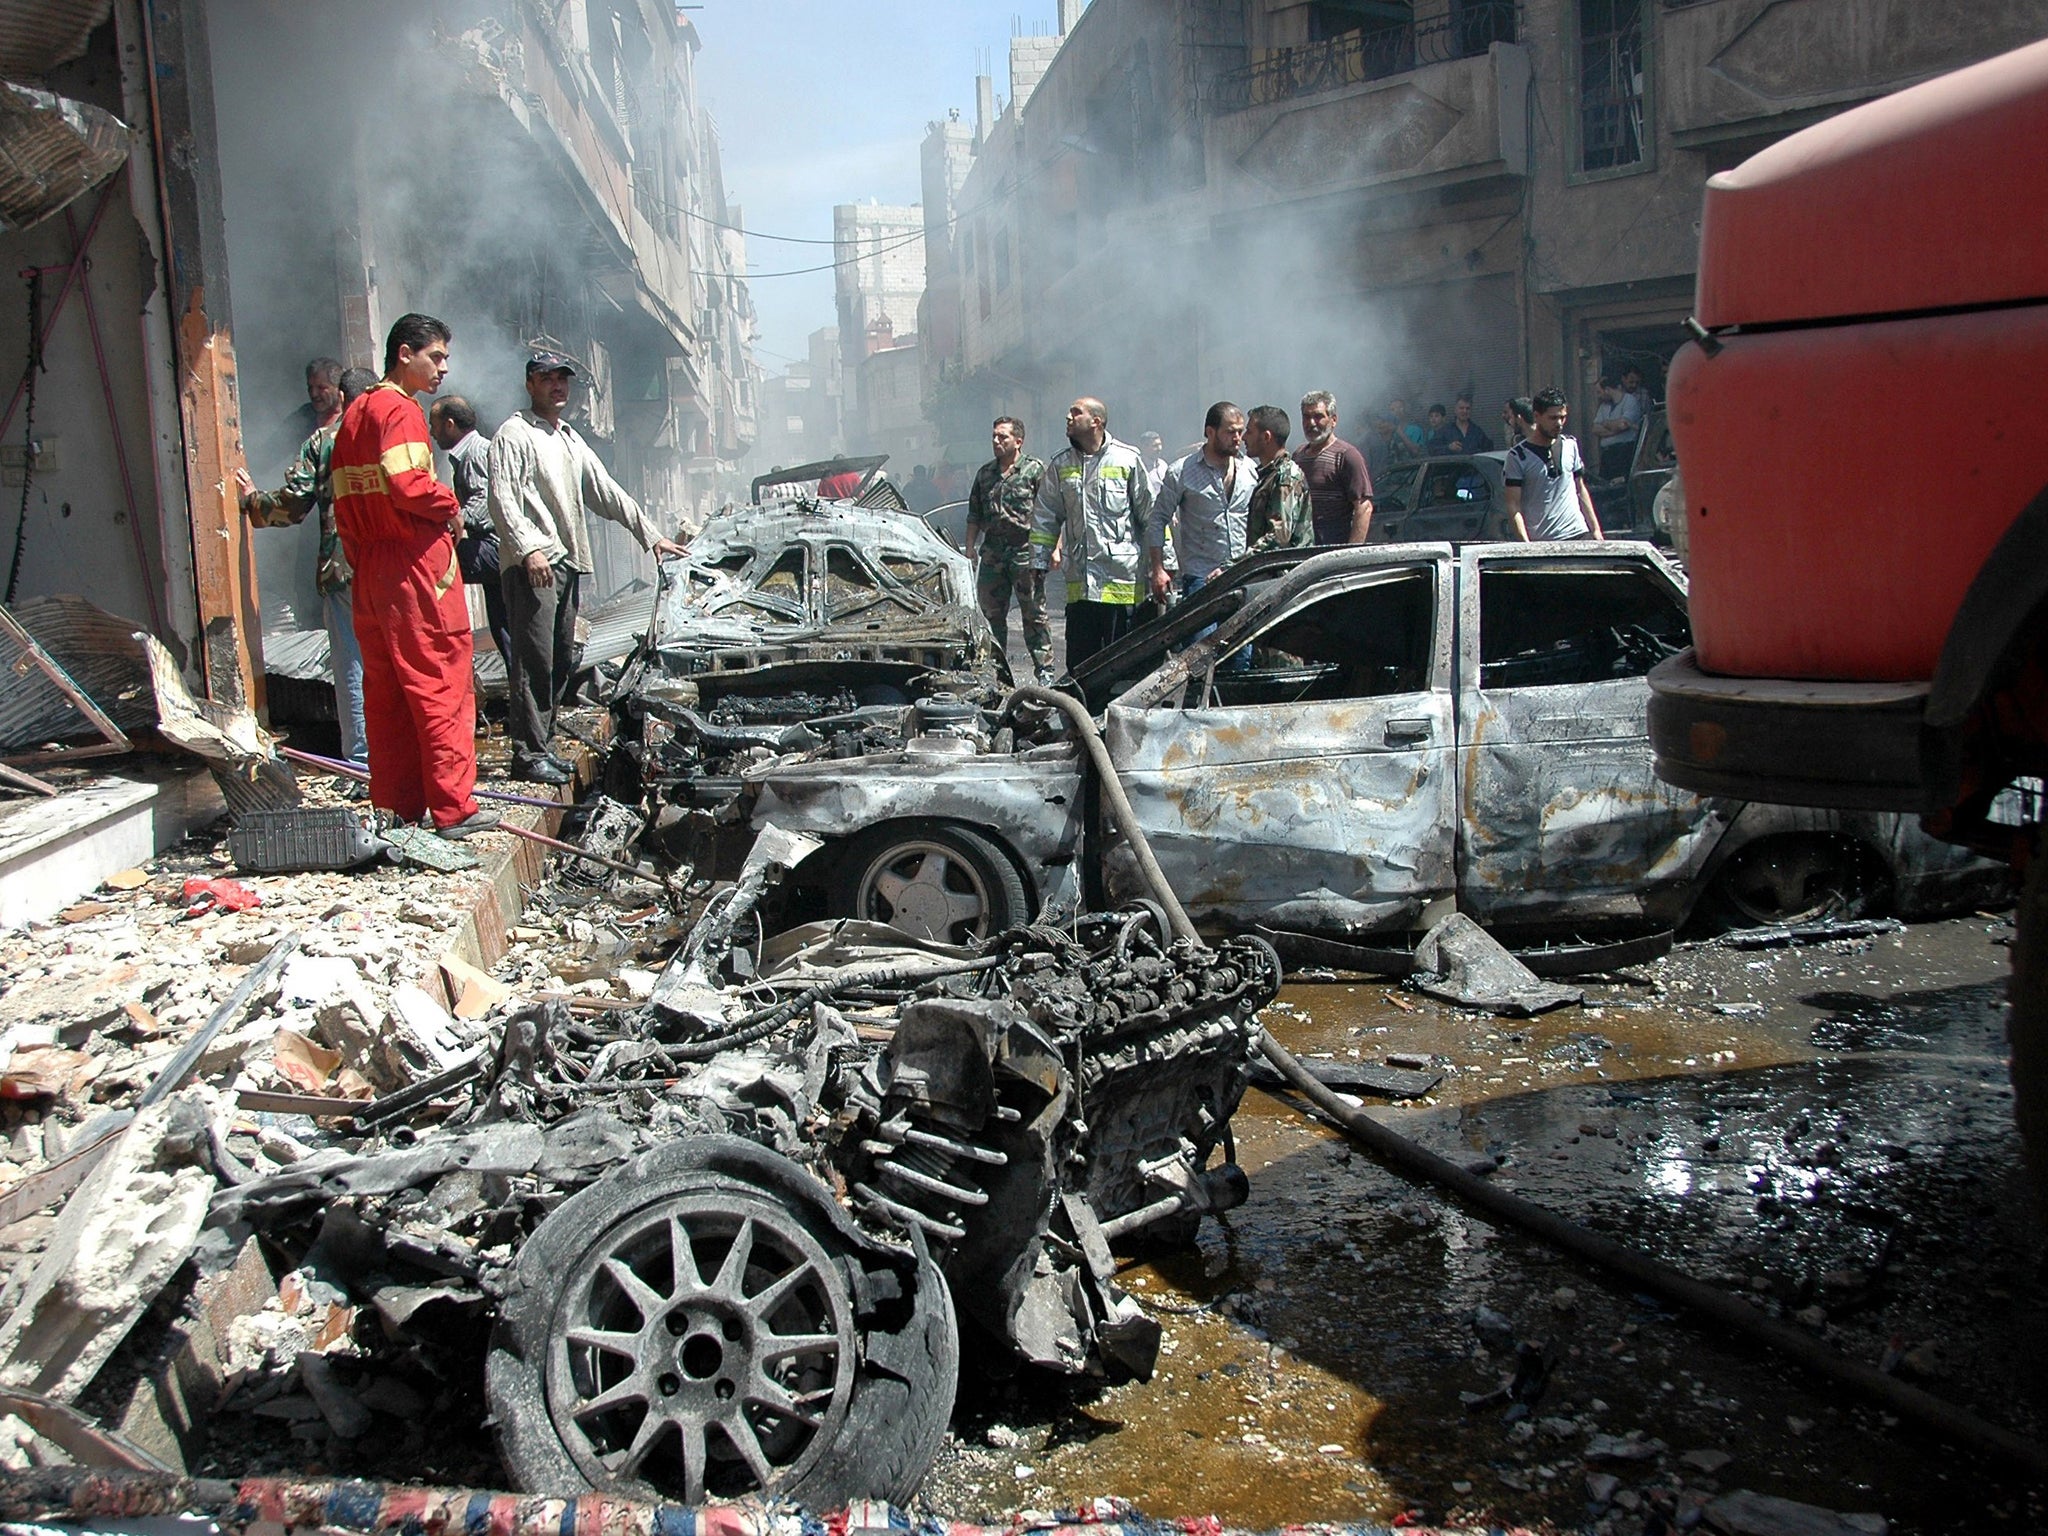 FILE PHOTO: The destruction left when a car bomb ripped through a crowded area of Syria's third city, Homs, last year